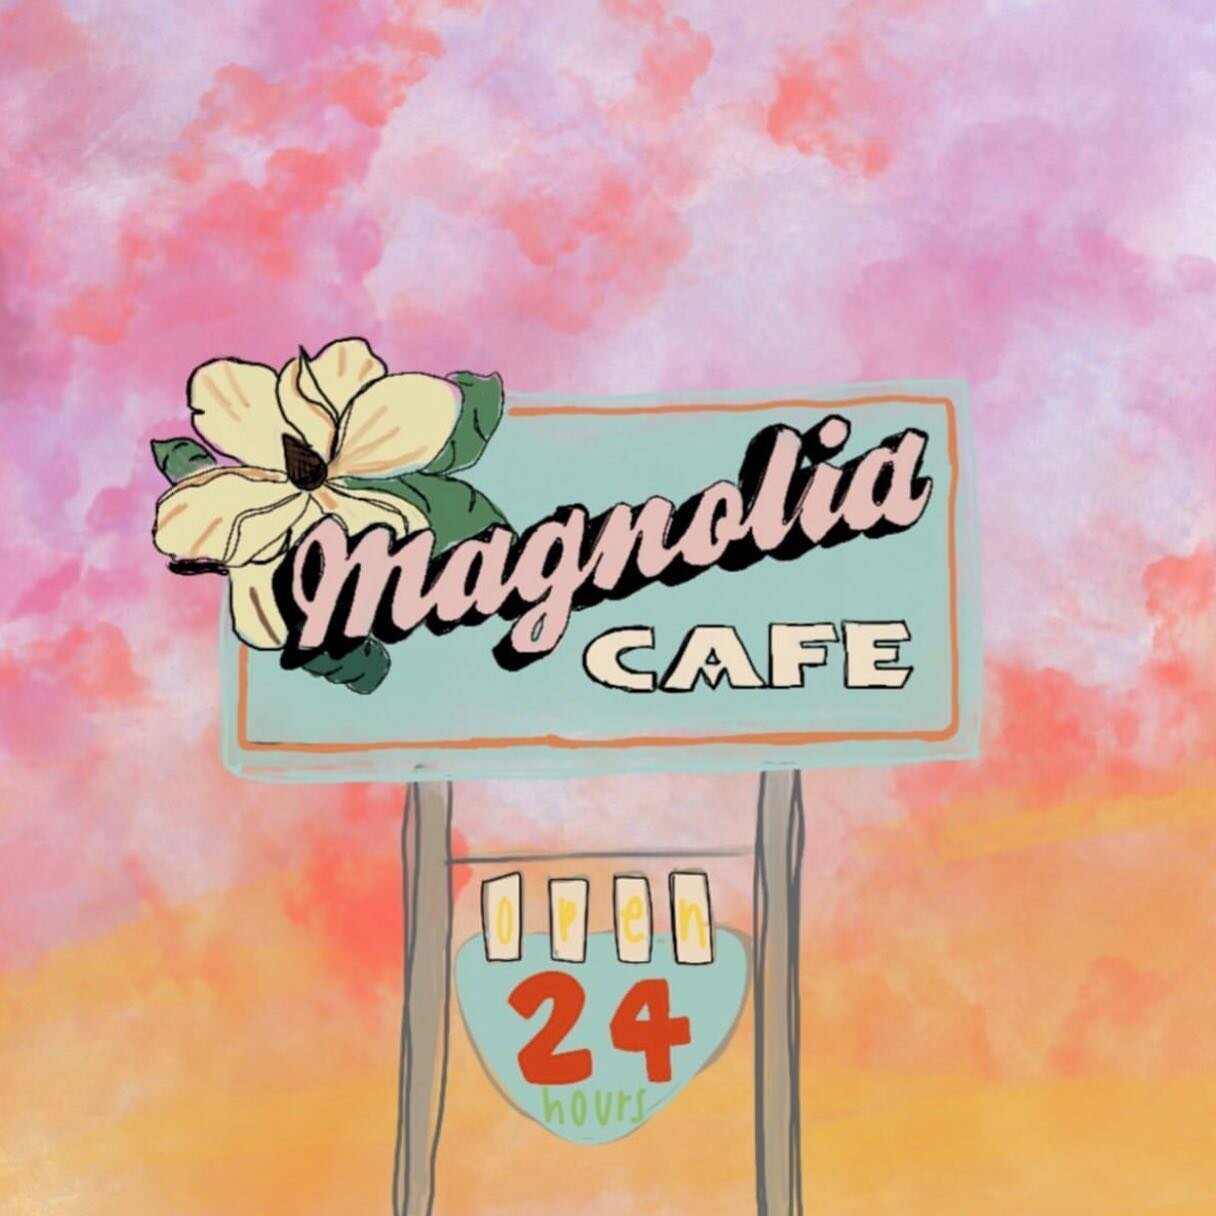 &ldquo;An ode to my favorite restaurant💗&rdquo; 
Check out this beautiful painting of our Magnolia West sign by @art.by.rms